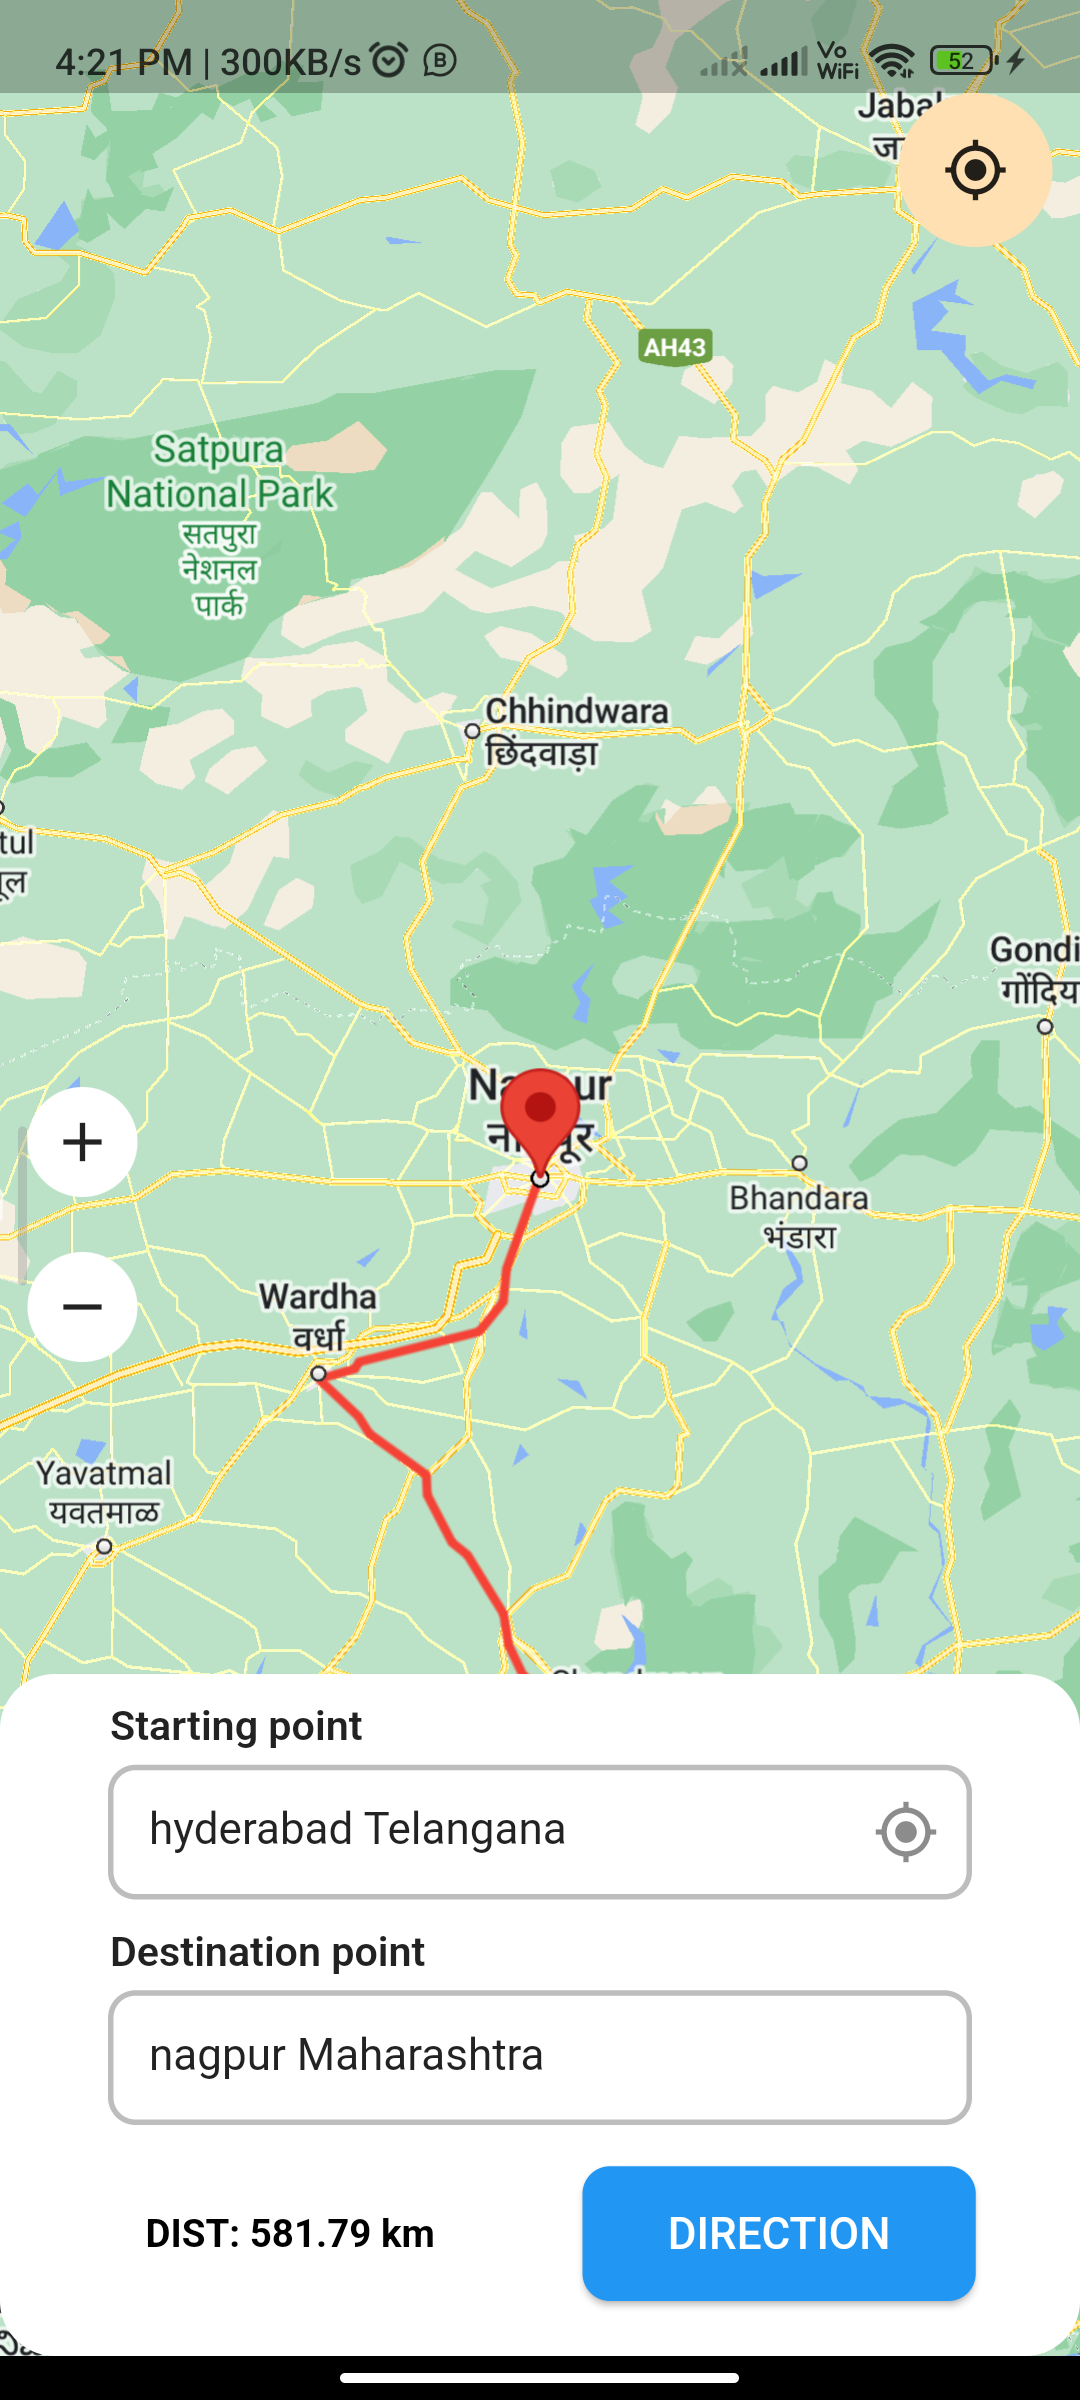 implementing an map in flutter